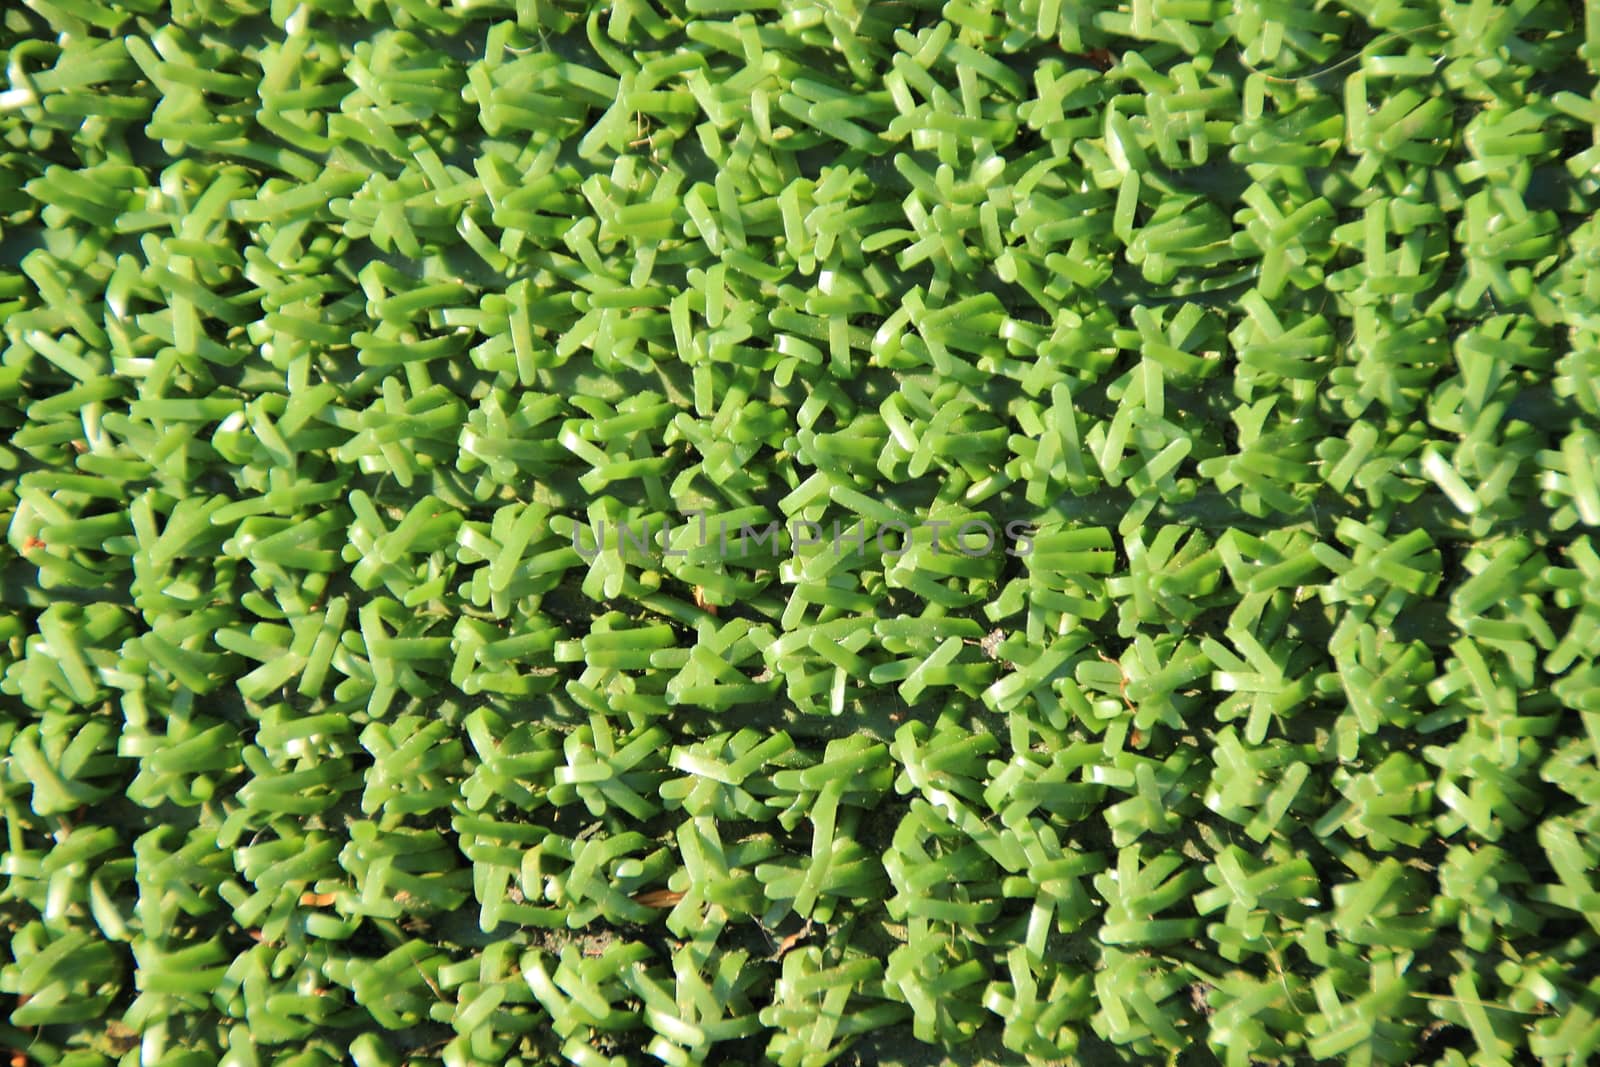 Artificial fake green plastic grass background